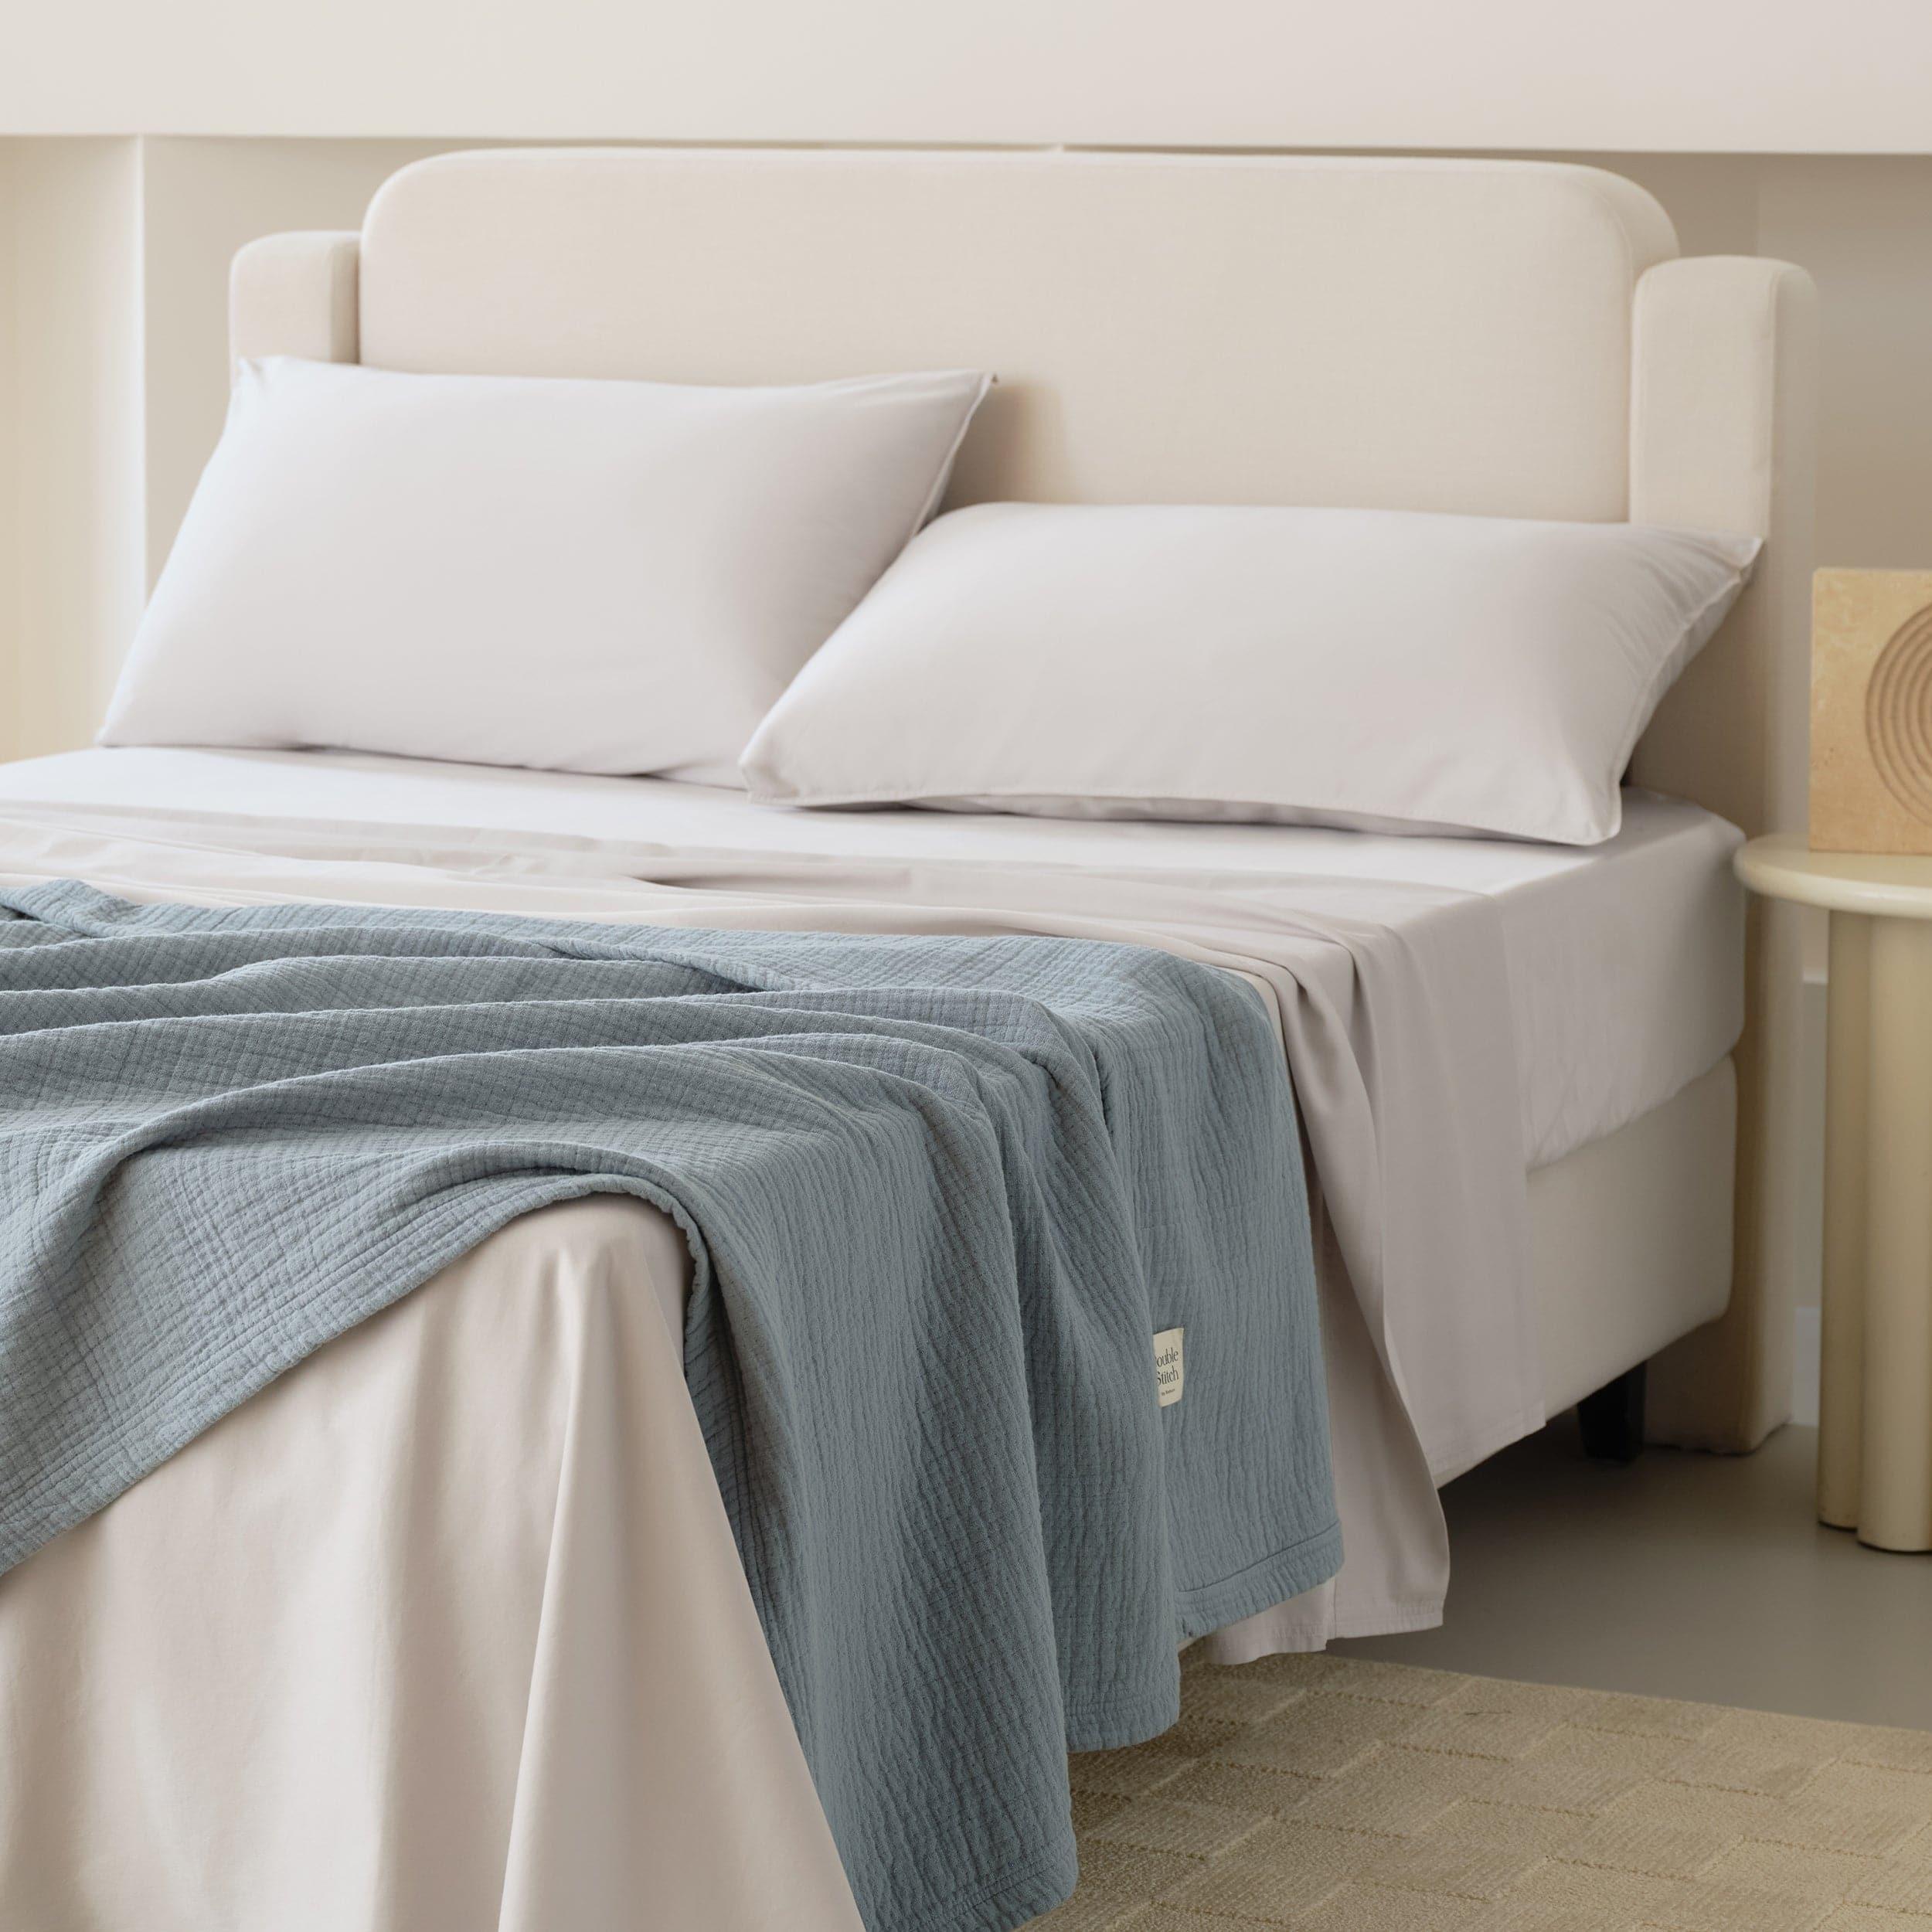 Sleep peacefully on a soft and luxurious king size bed sheet set.